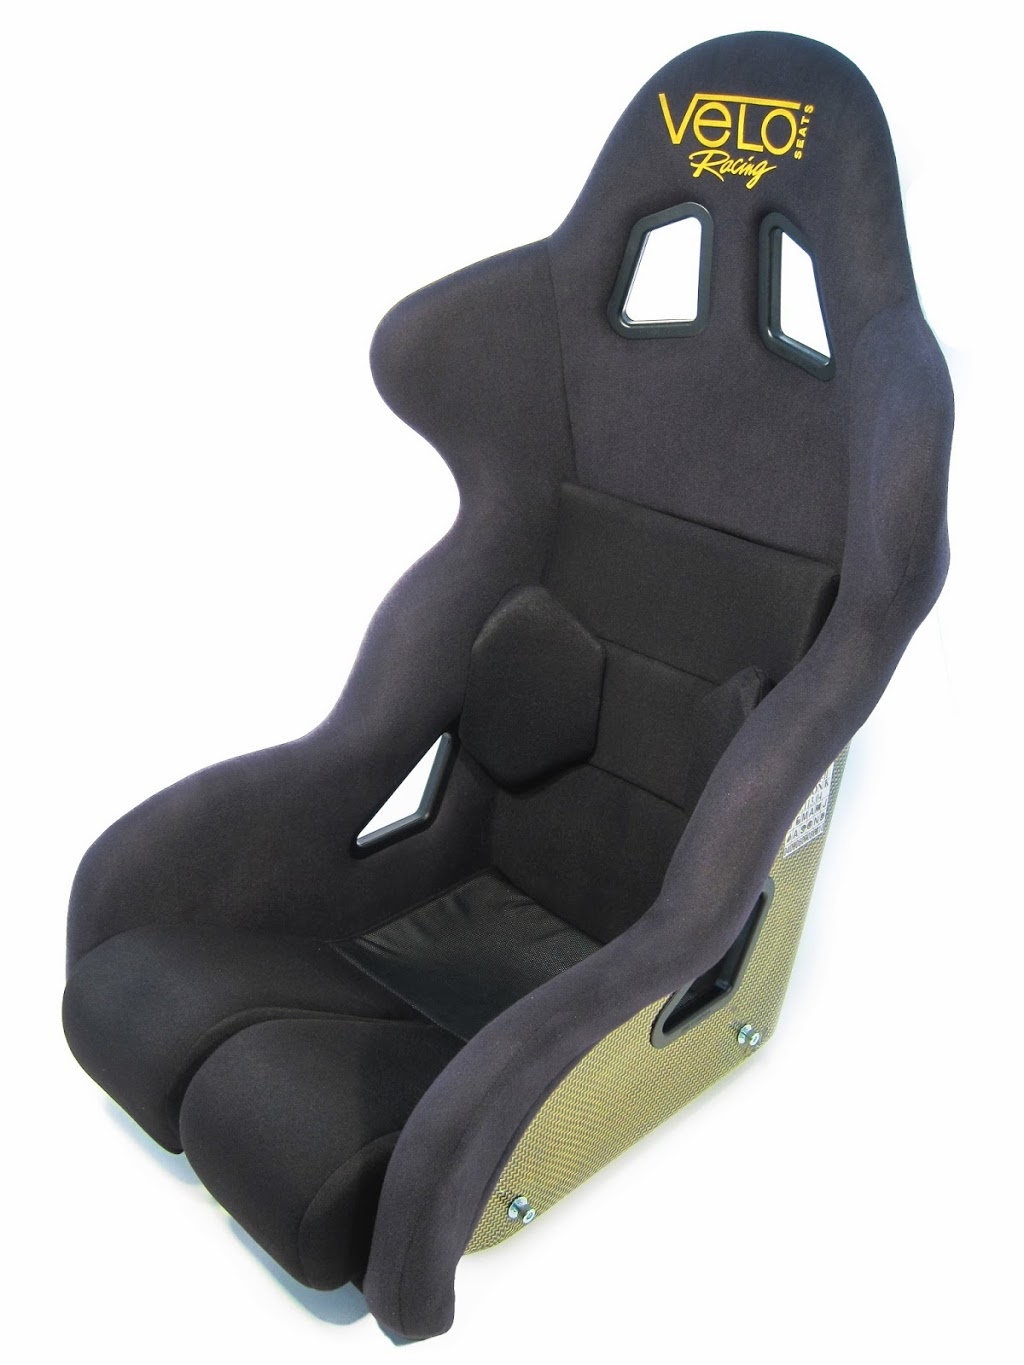 Velo Seats & Racing Products | Factory 5/26-28 Jacobsen Cres, Holden Hill SA 5088, Australia | Phone: (08) 8369 0055